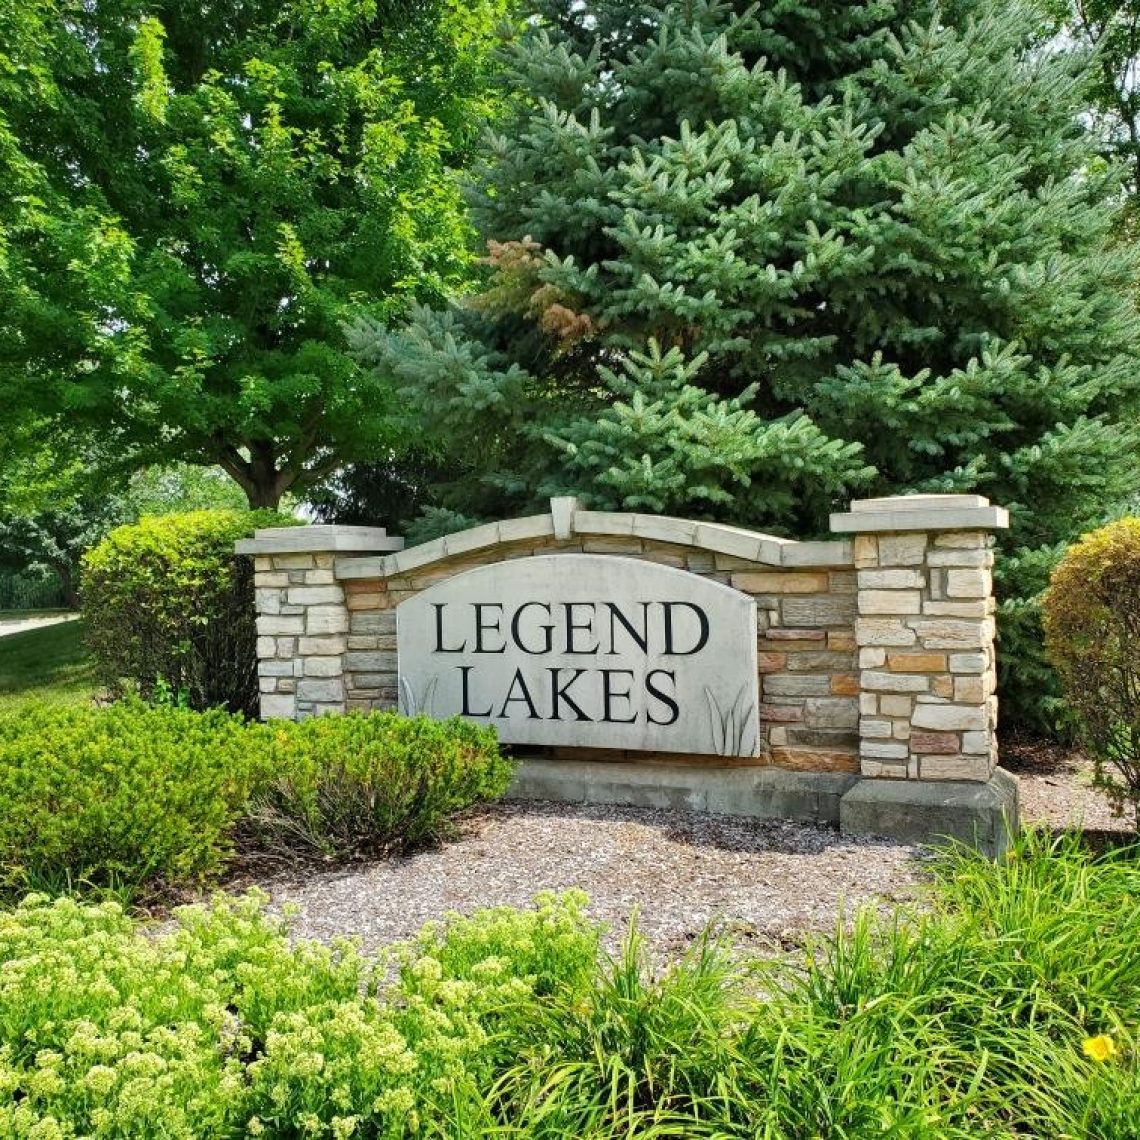 Legend Lakes in McHenry Illinois